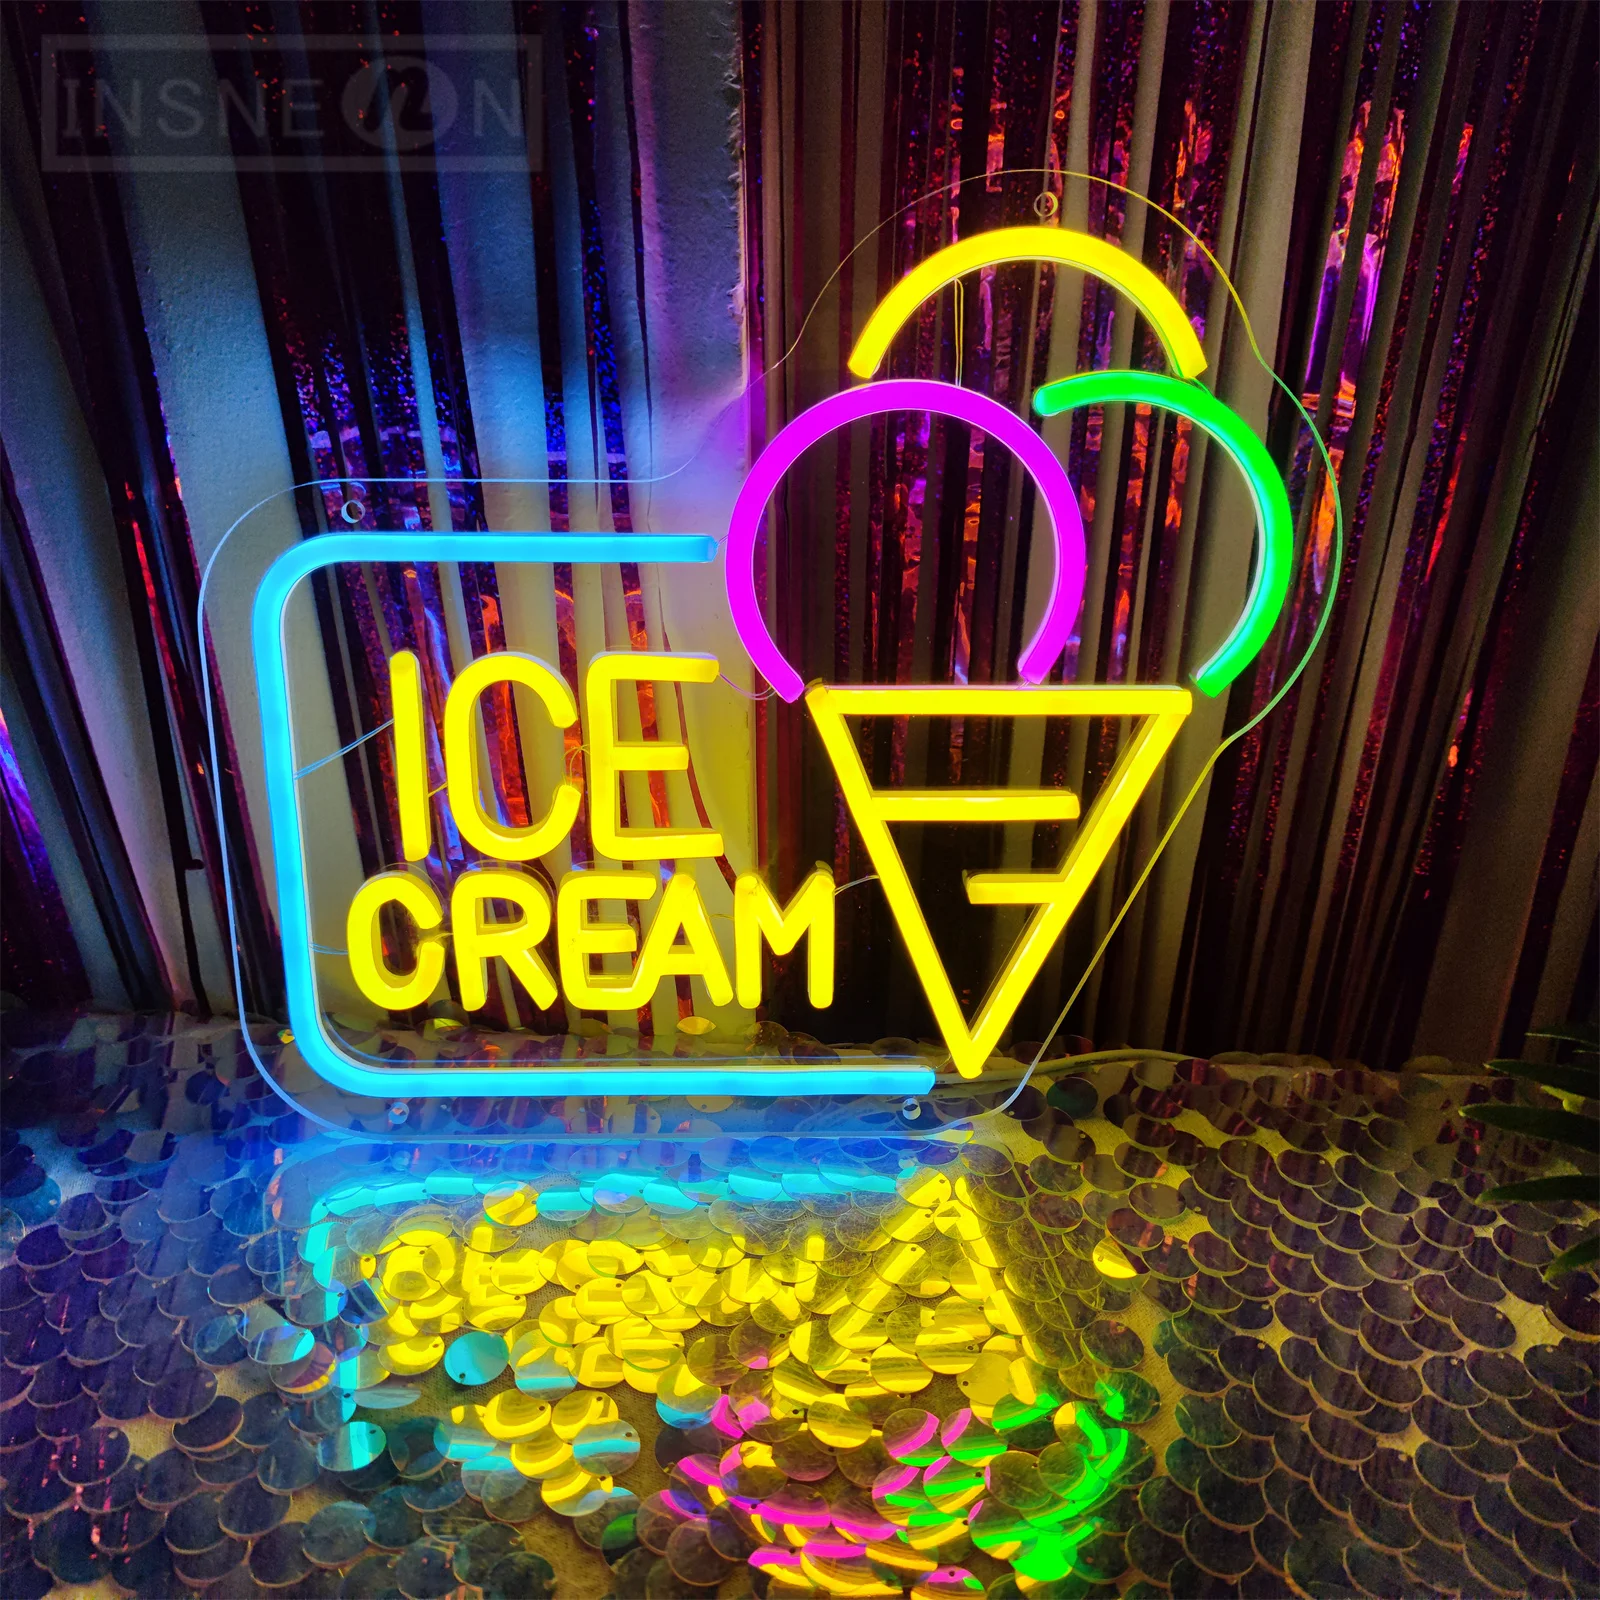 

Ice Cream LED Neon Signs Cold Drinks for Snack Shop Restaurant Kitchen Business Bar Wall Neon Sign Decor Gift LED Neon Decorate